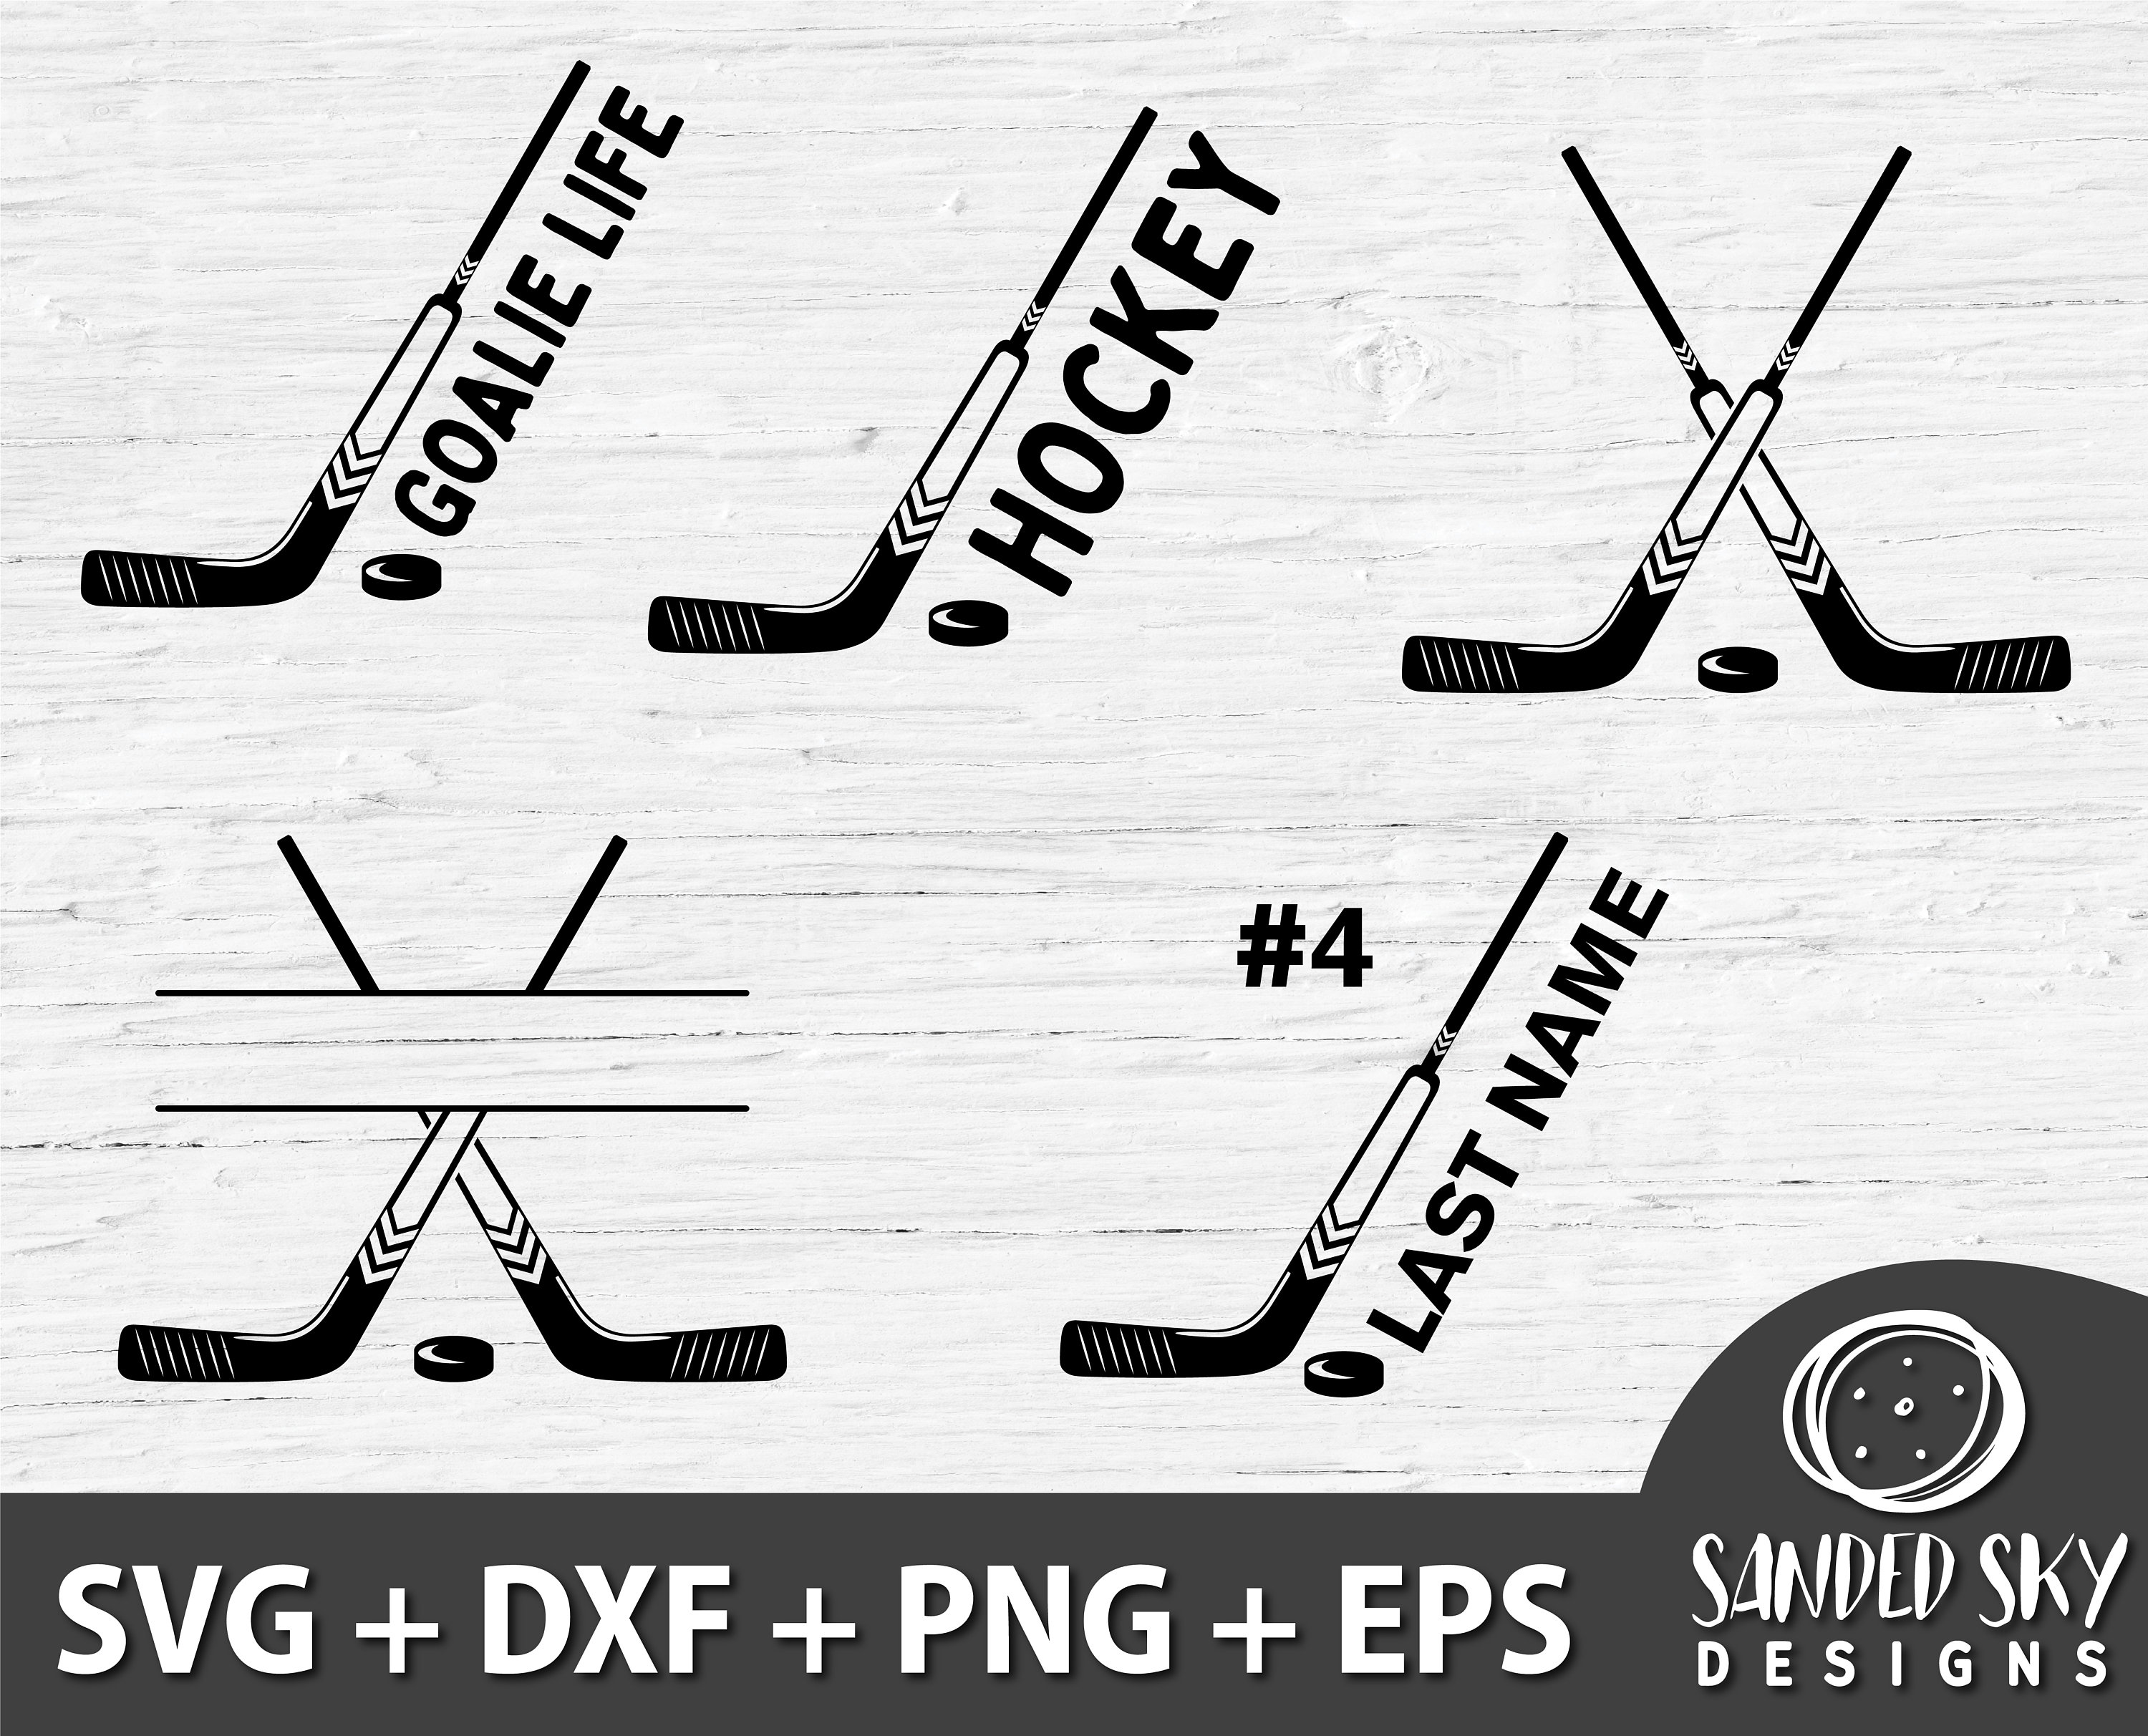 Custom 3D Hockey Bag Name Tags, Personalized With Your Name and Player  Number. Plastic, Unbreakable. Raised Lettering, Hockey, Name Tag, 